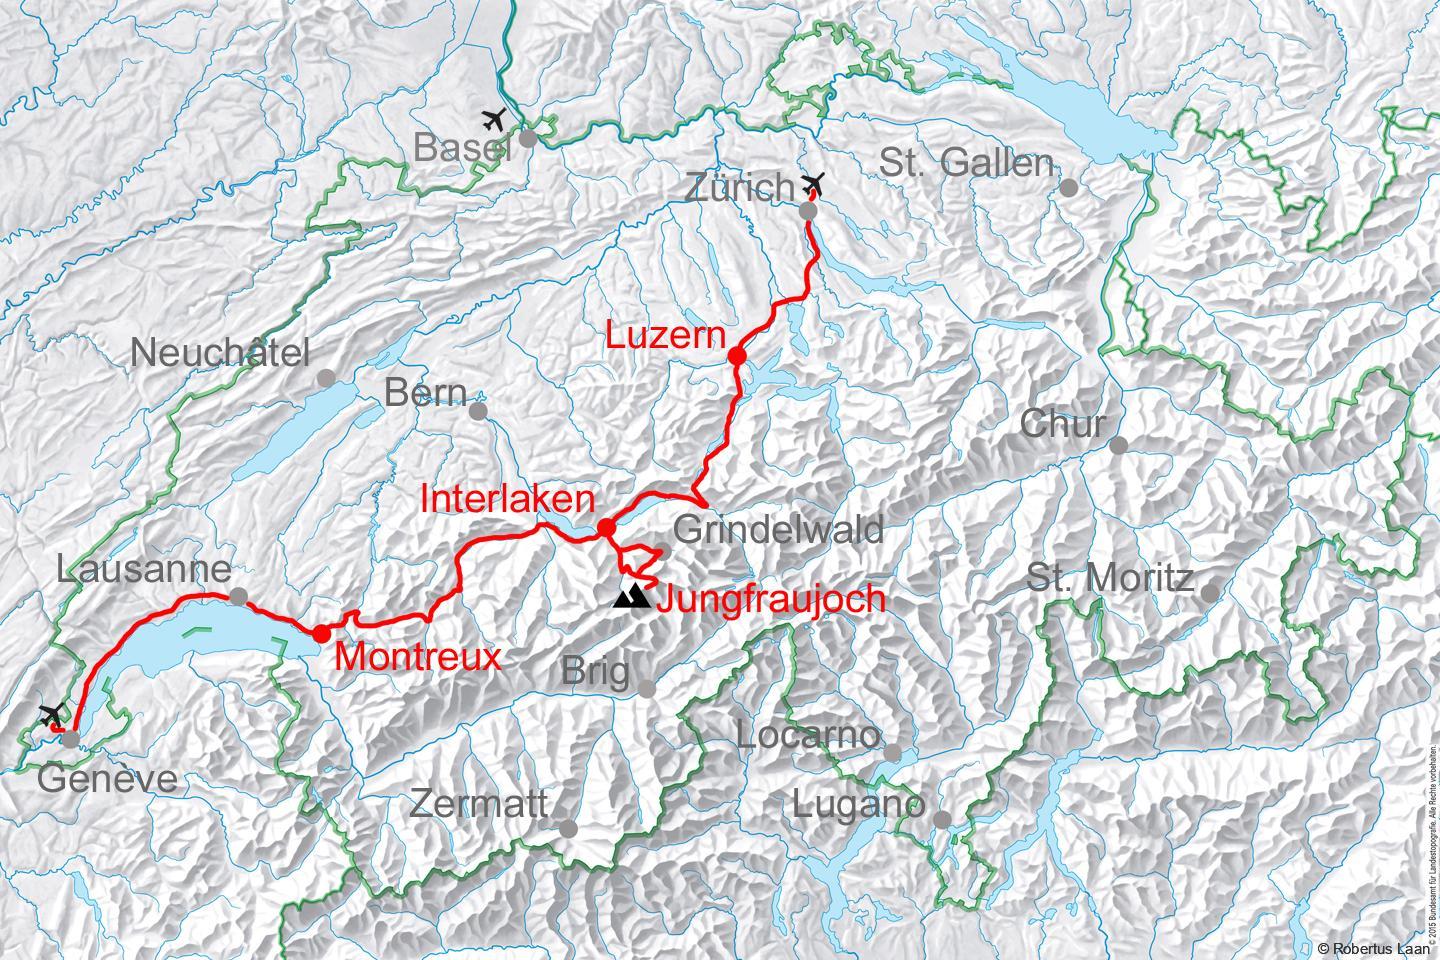 GoldenPass Line route. The tour can start at any Swiss airport.